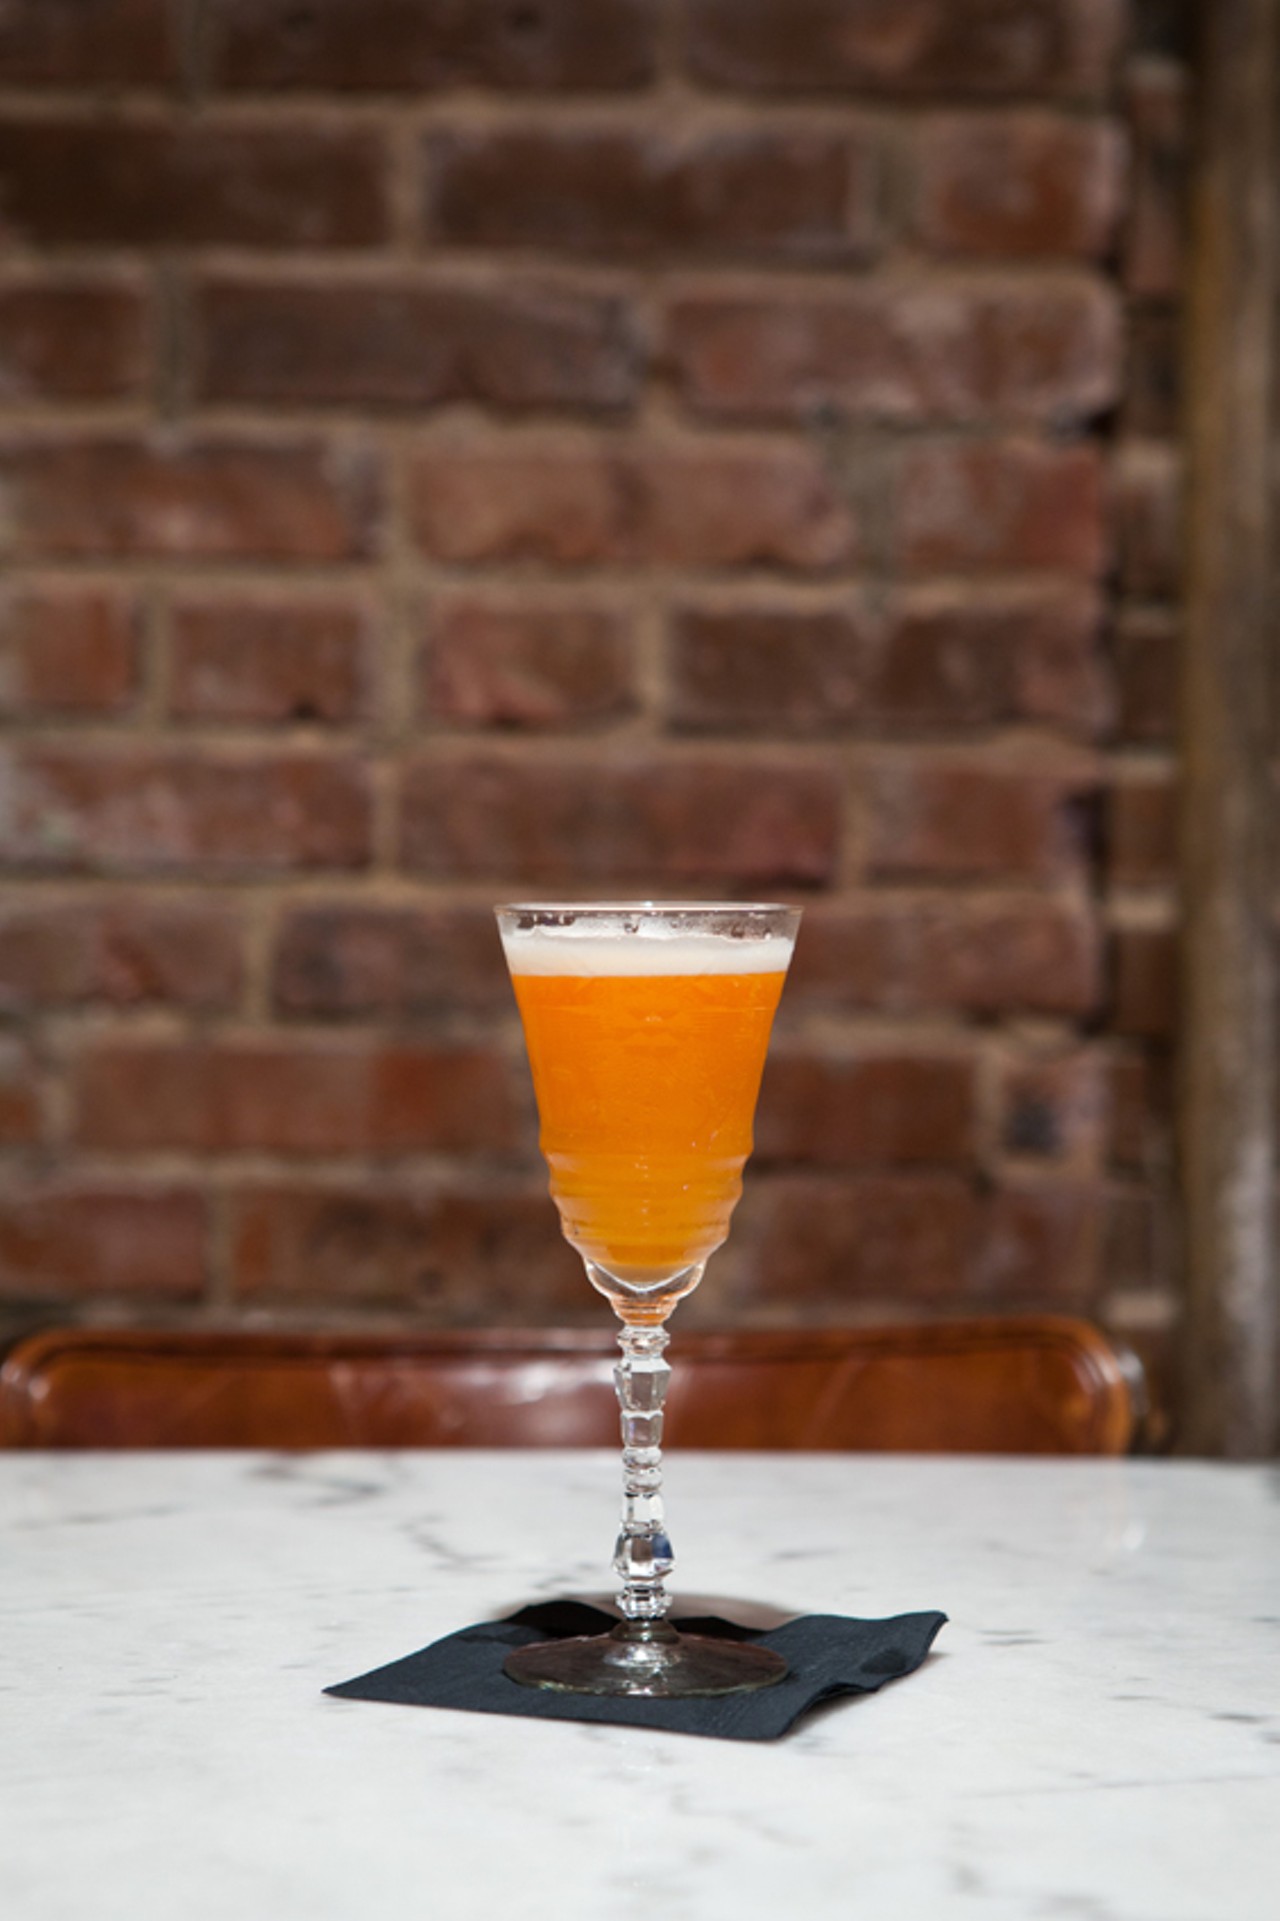 The Subtle Hustle cocktail, made with Aperol, Cocchi Americano, lemon juice, passion fruit, and champagne.